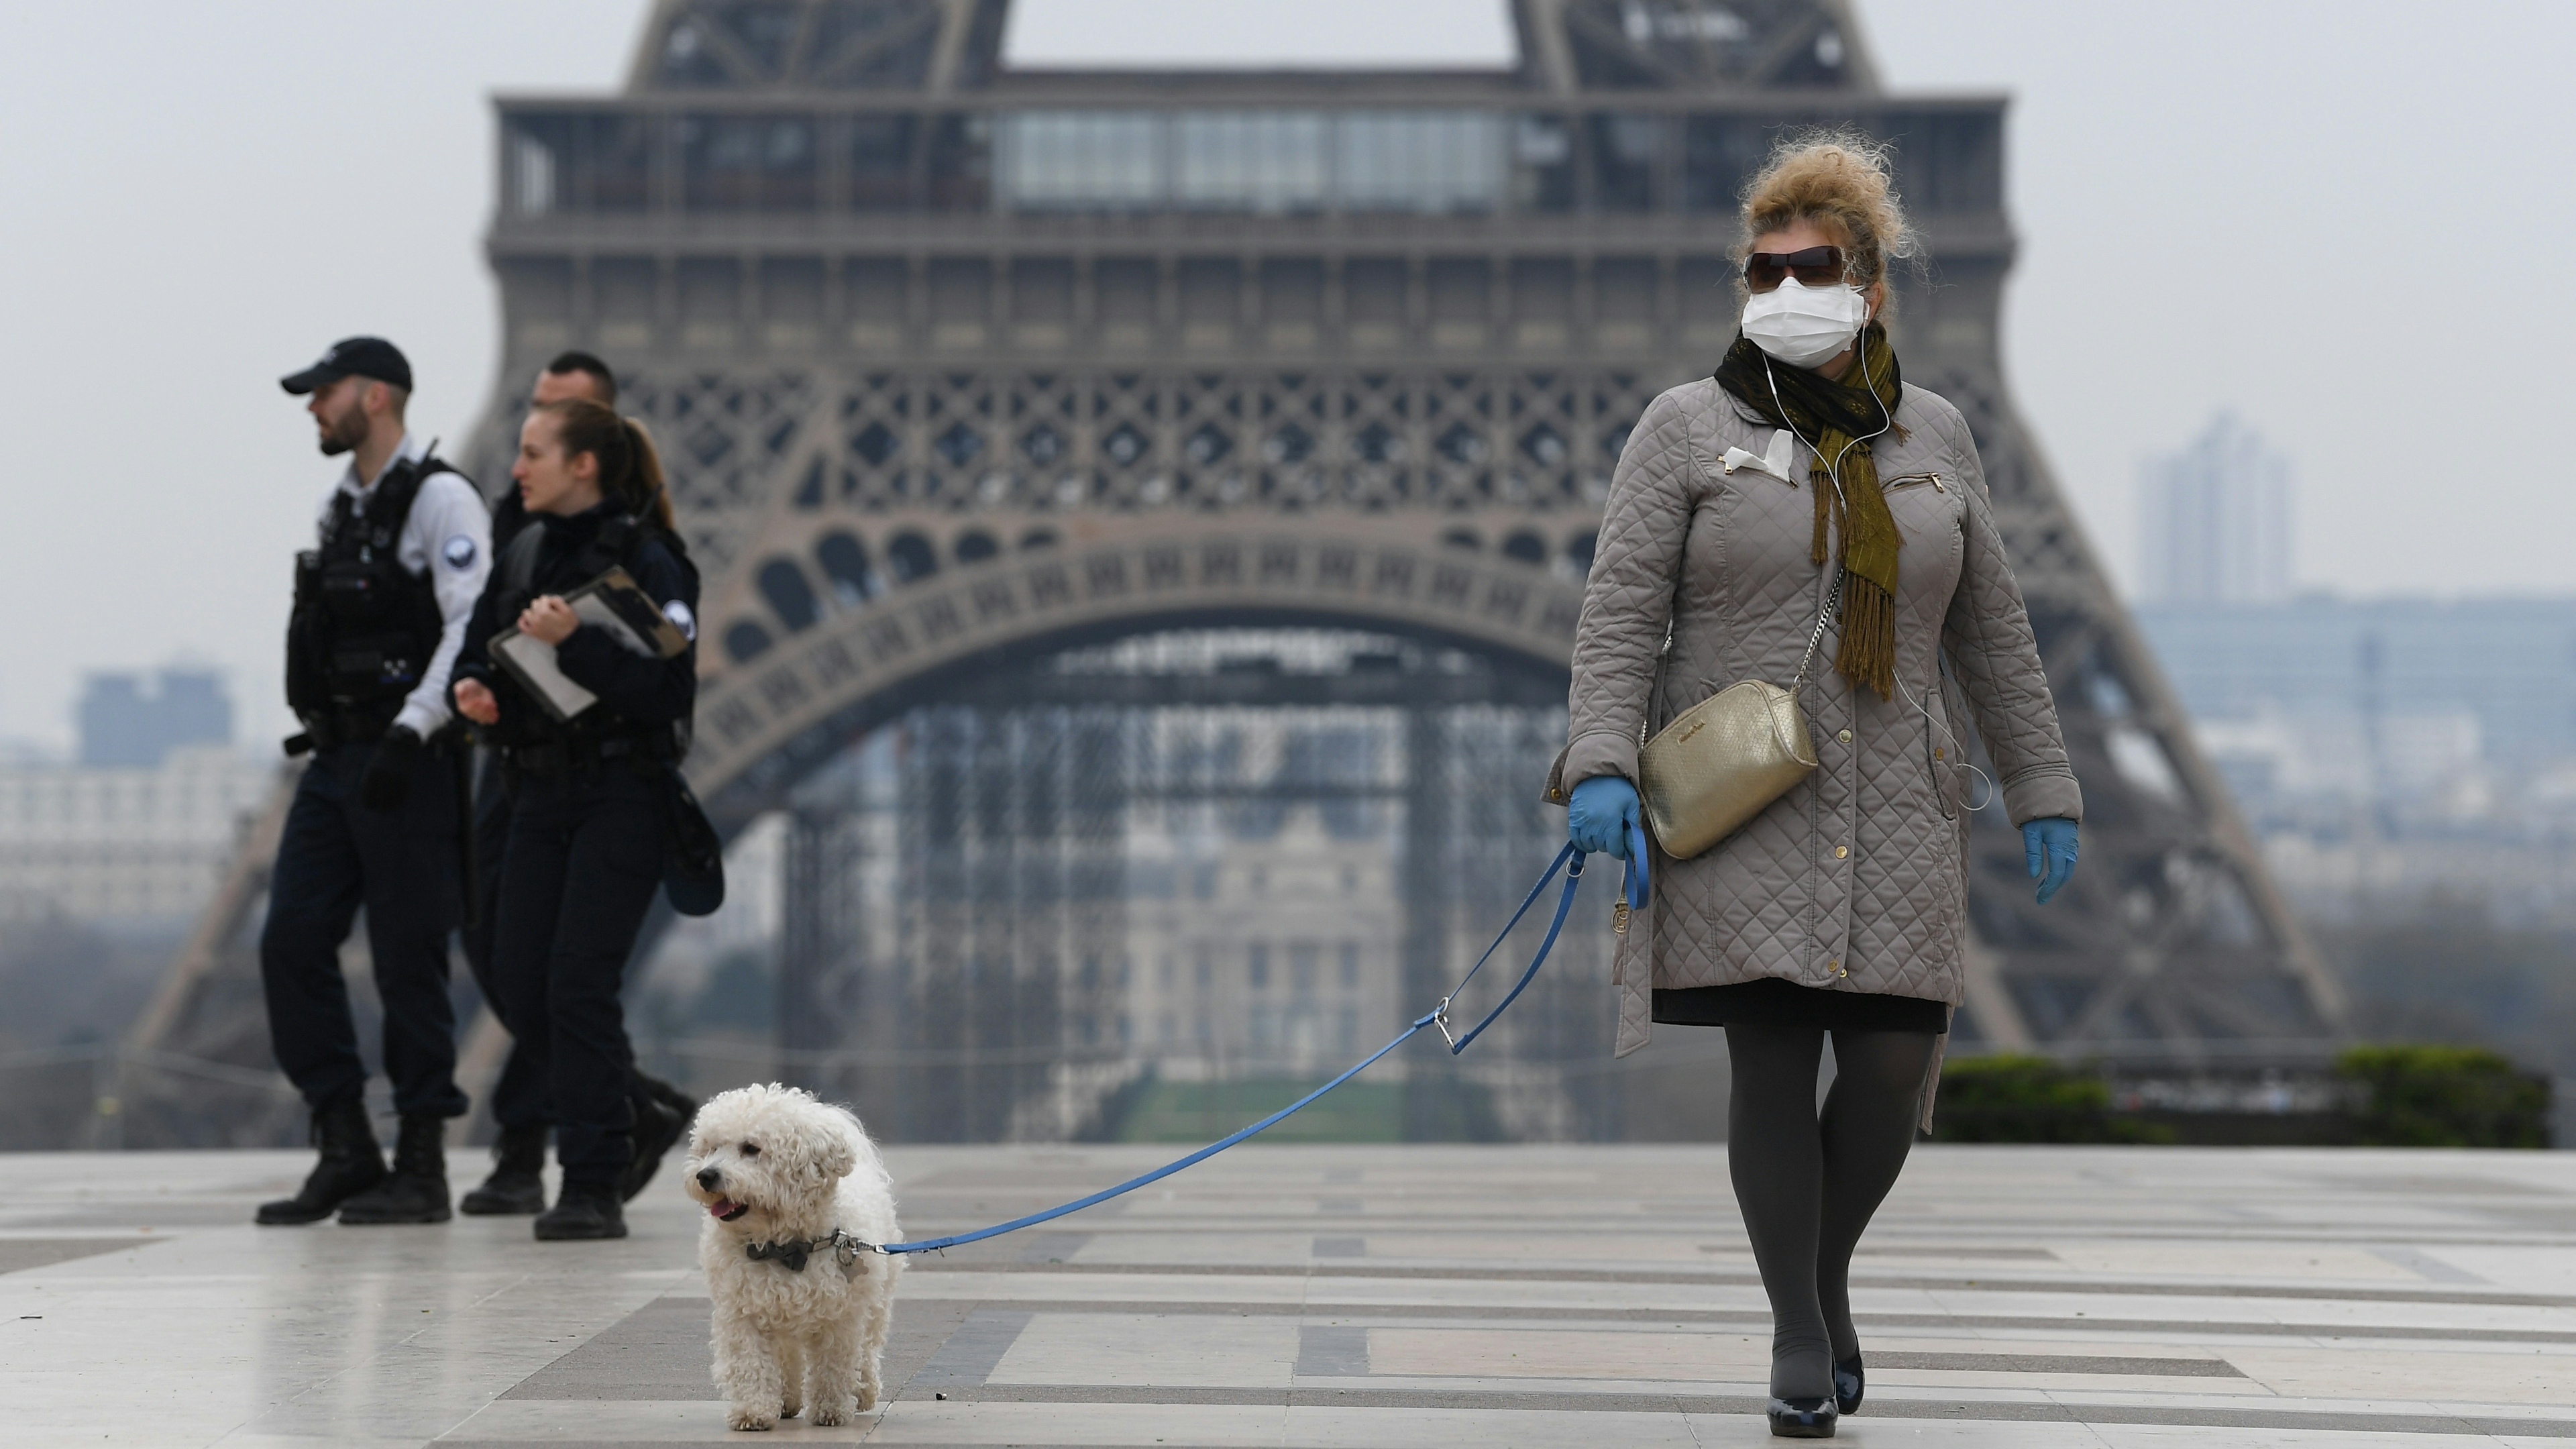 A woman wears protective gloves and a mask near the Eiffel Tower